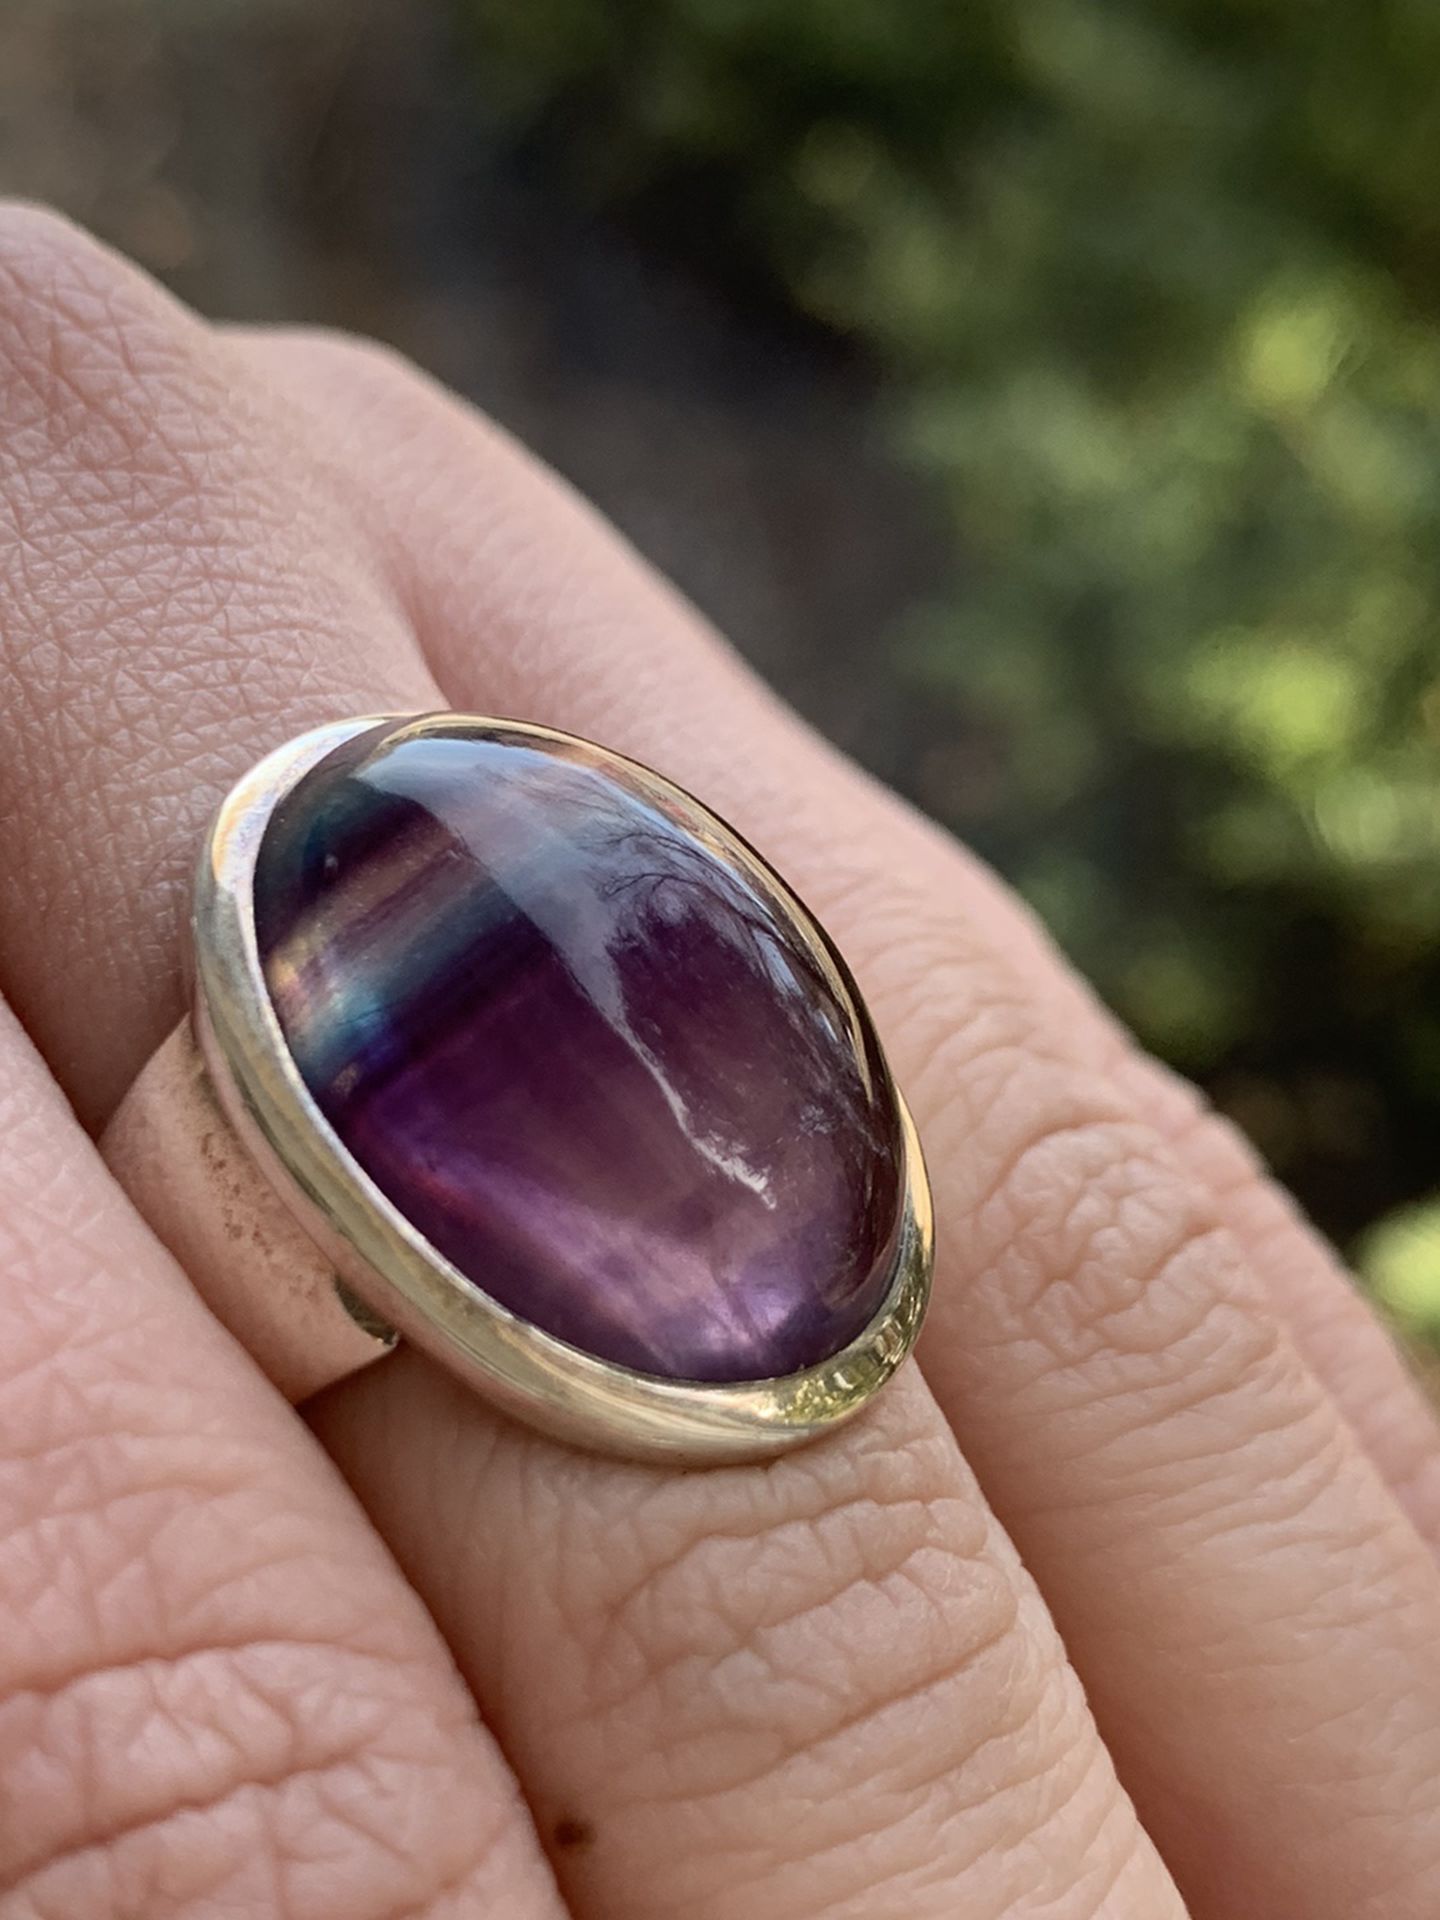 $Sterling silver Fluorite ring. New with Tags Sz 7.25 10.2gr Easy contactless pick up near Clark/Montrose Venmo Zelle and exact cash is accepted